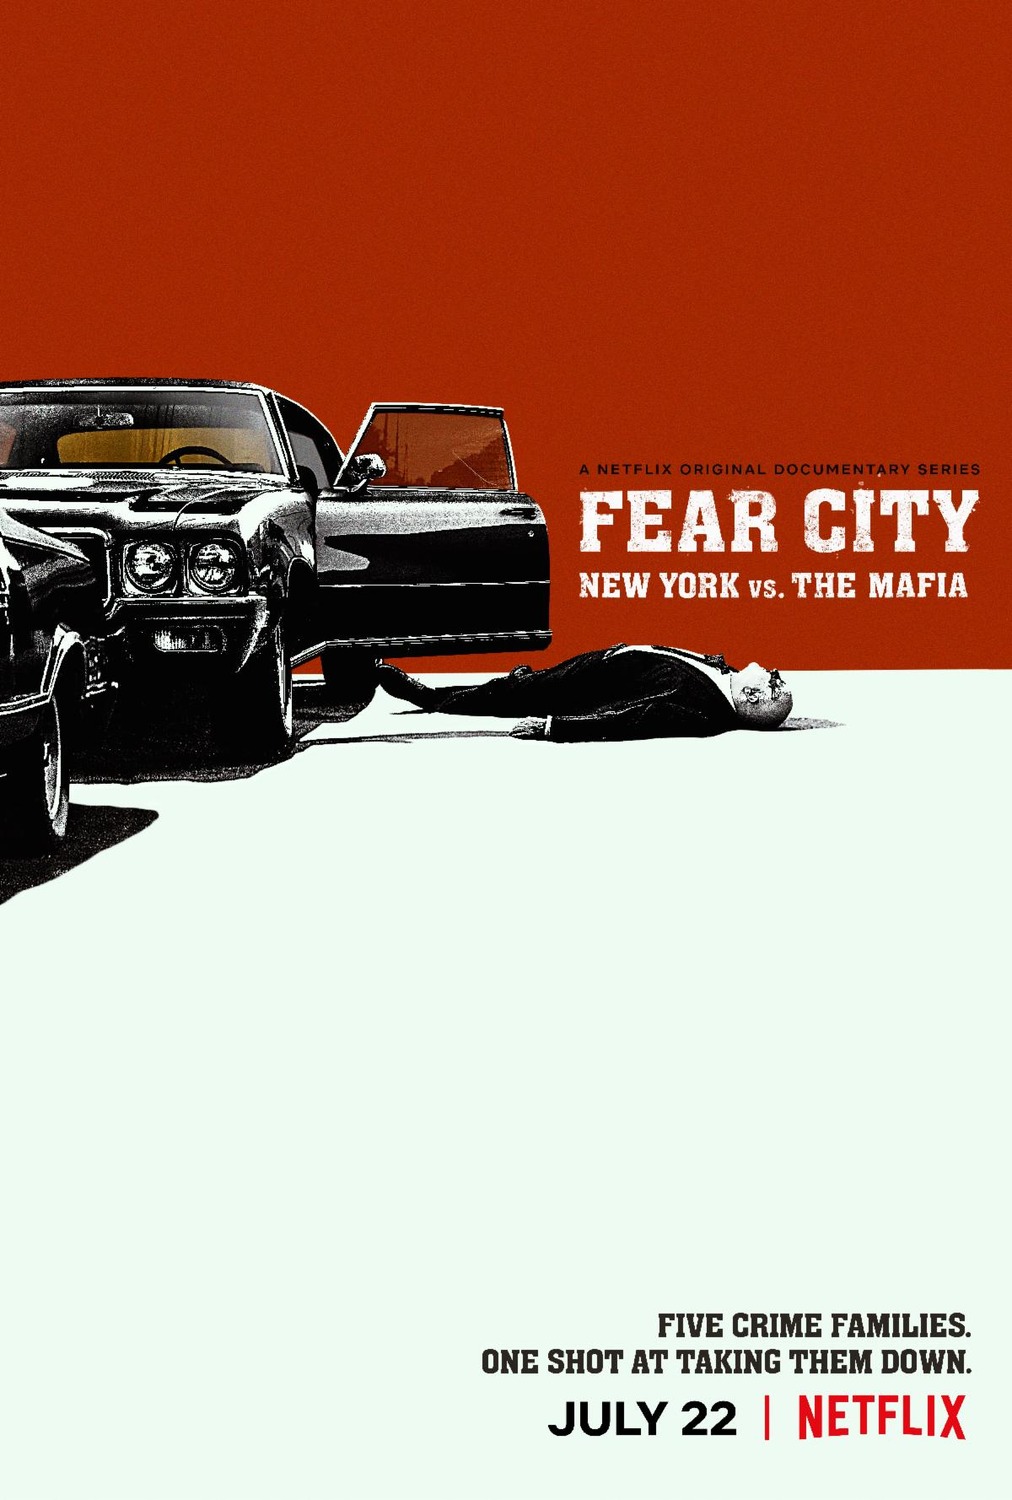 Extra Large TV Poster Image for Fear City: New York vs the Mafia 